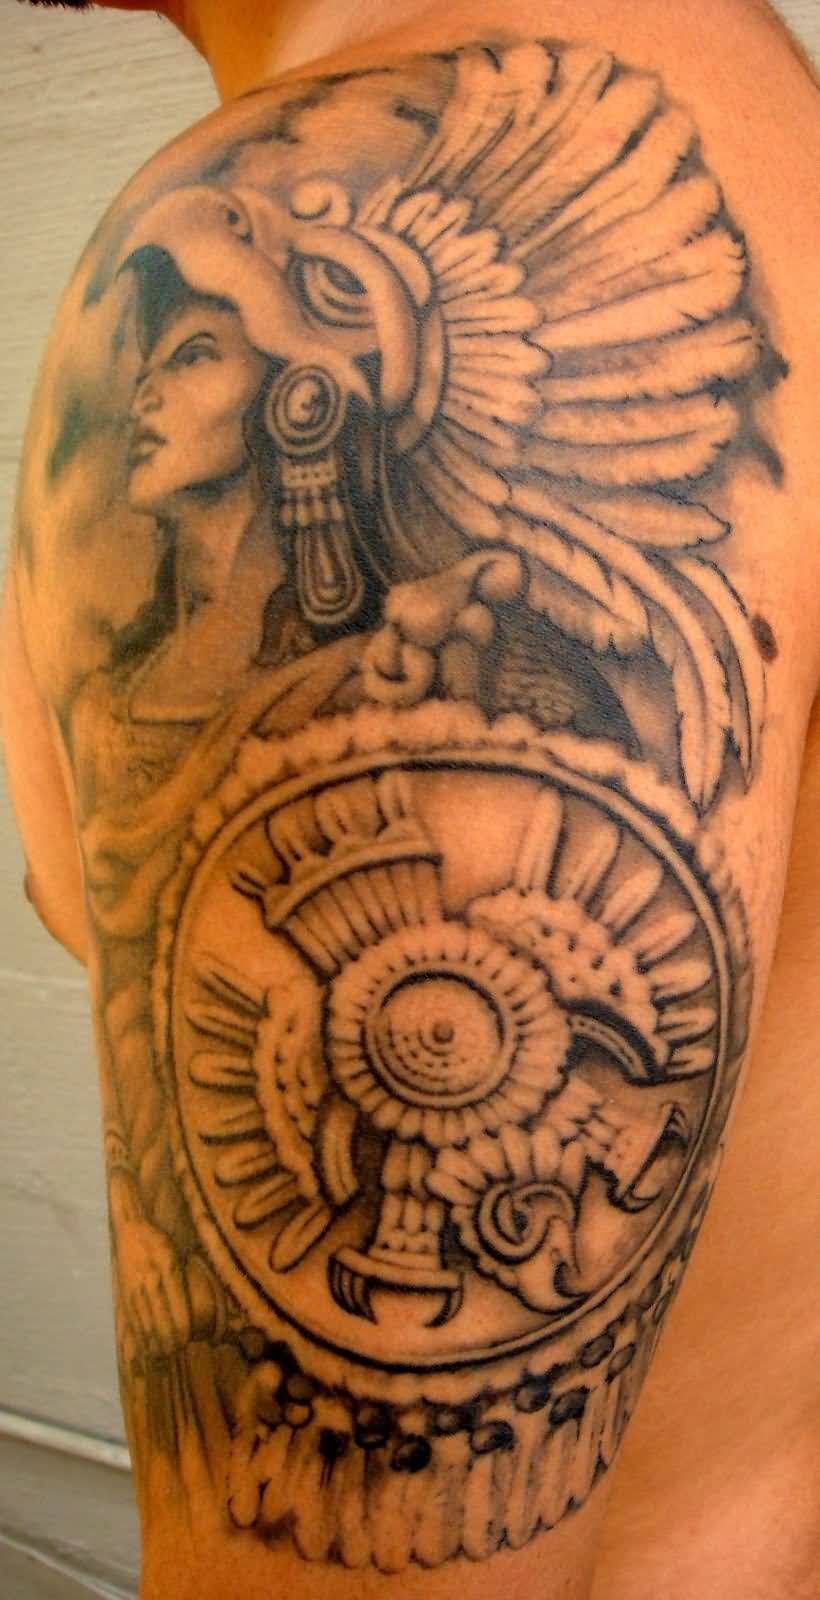 Attractive Female Aztec Warrior Tattoo With Shield On Men Arm Ink regarding dimensions 820 X 1600